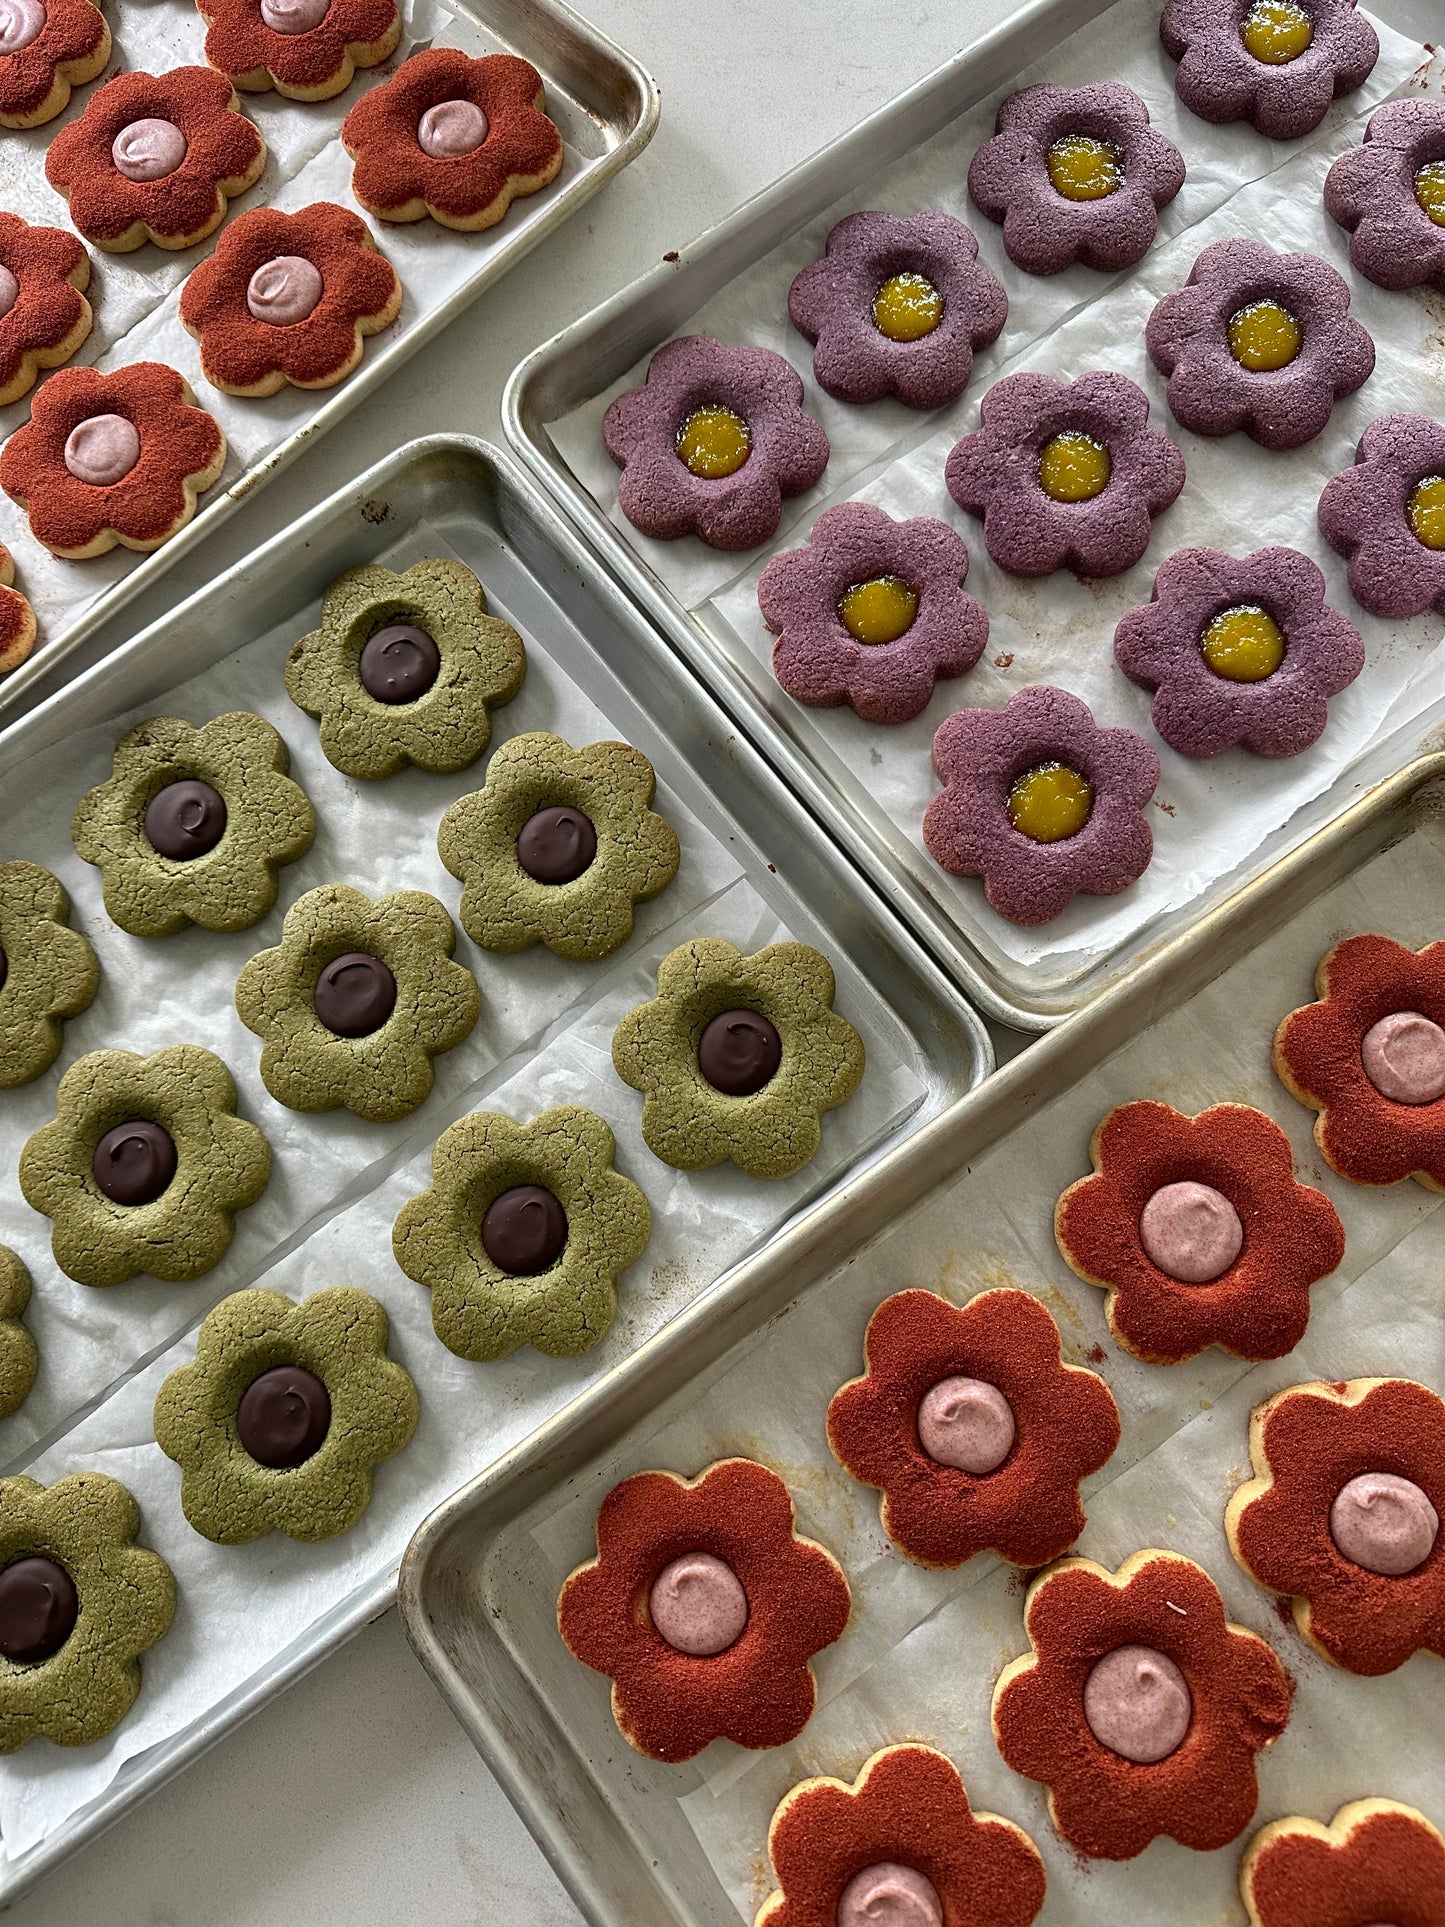 Build-a-Box of Flower Cookies